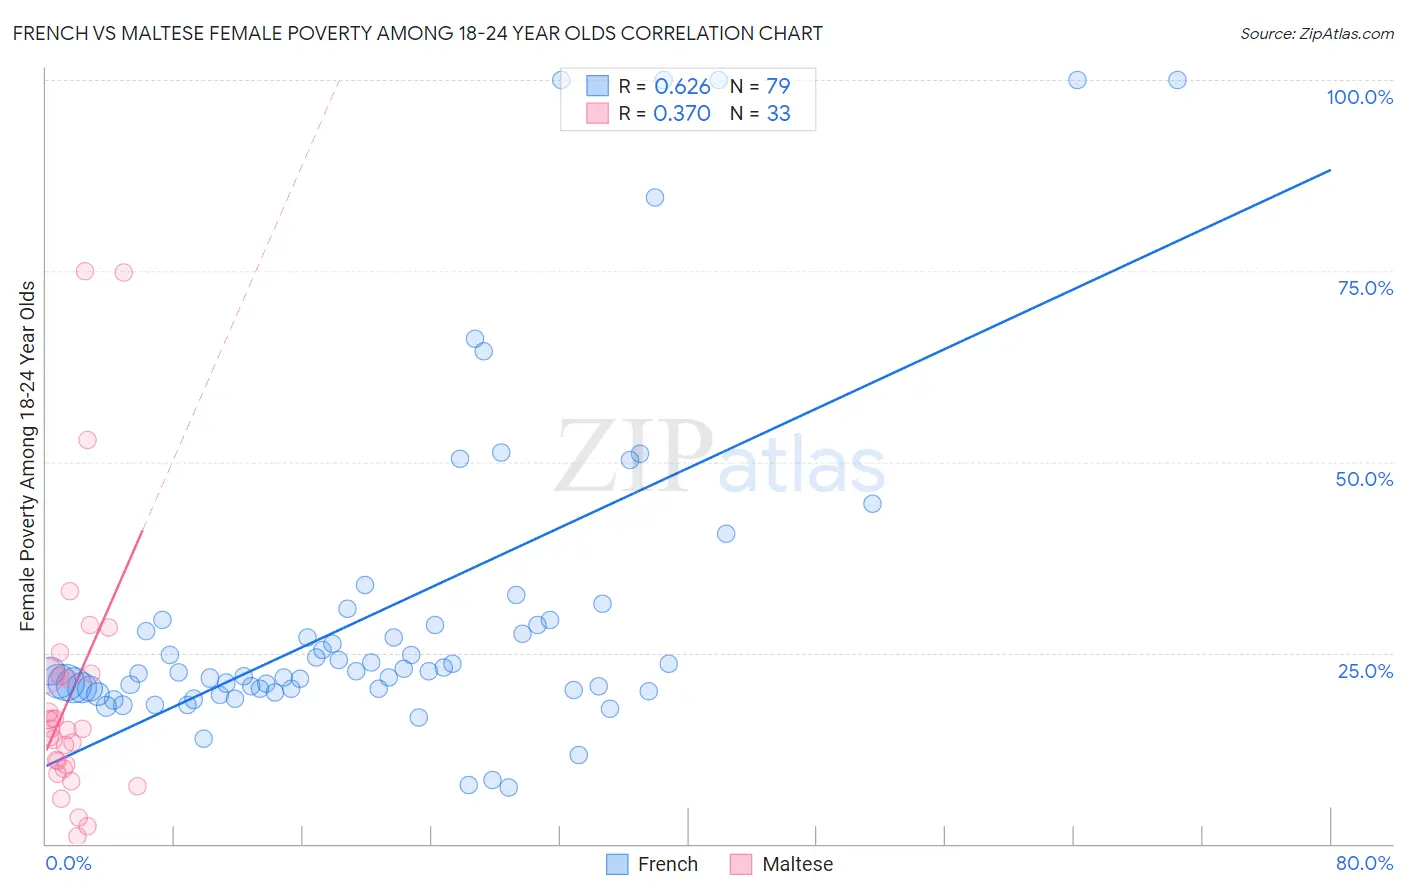 French vs Maltese Female Poverty Among 18-24 Year Olds